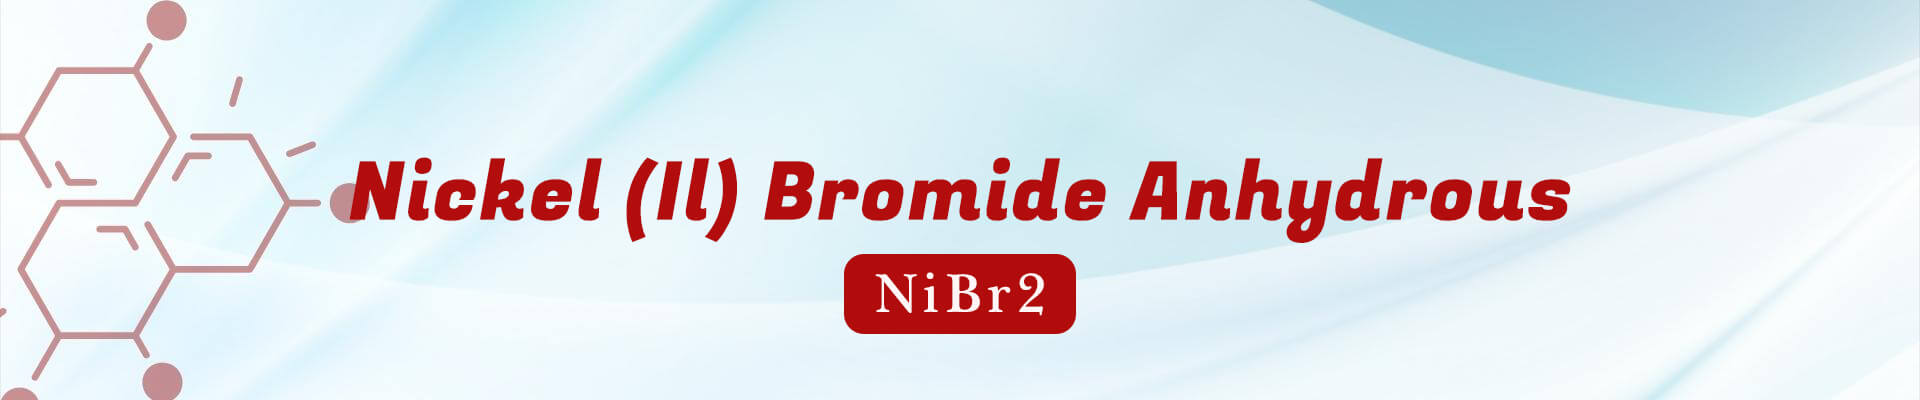 Nickel (Il) Bromide Anhydrous